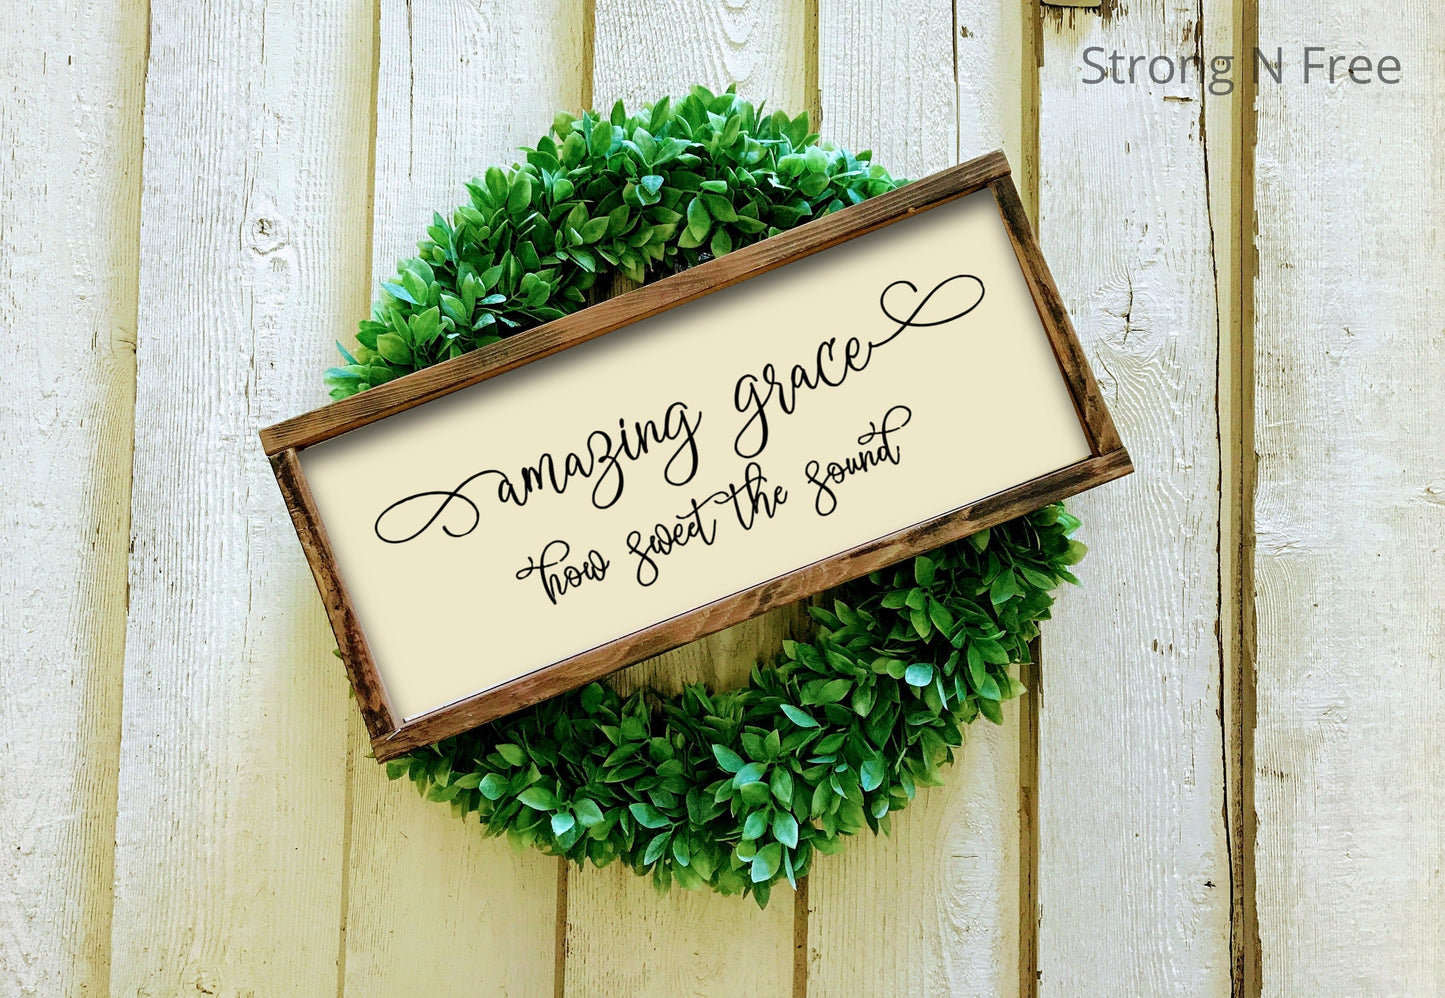 Amazing Grace How Sweet The Sound - Wood Sign - Farmhouse Sign - Wall Decor - Home Decor